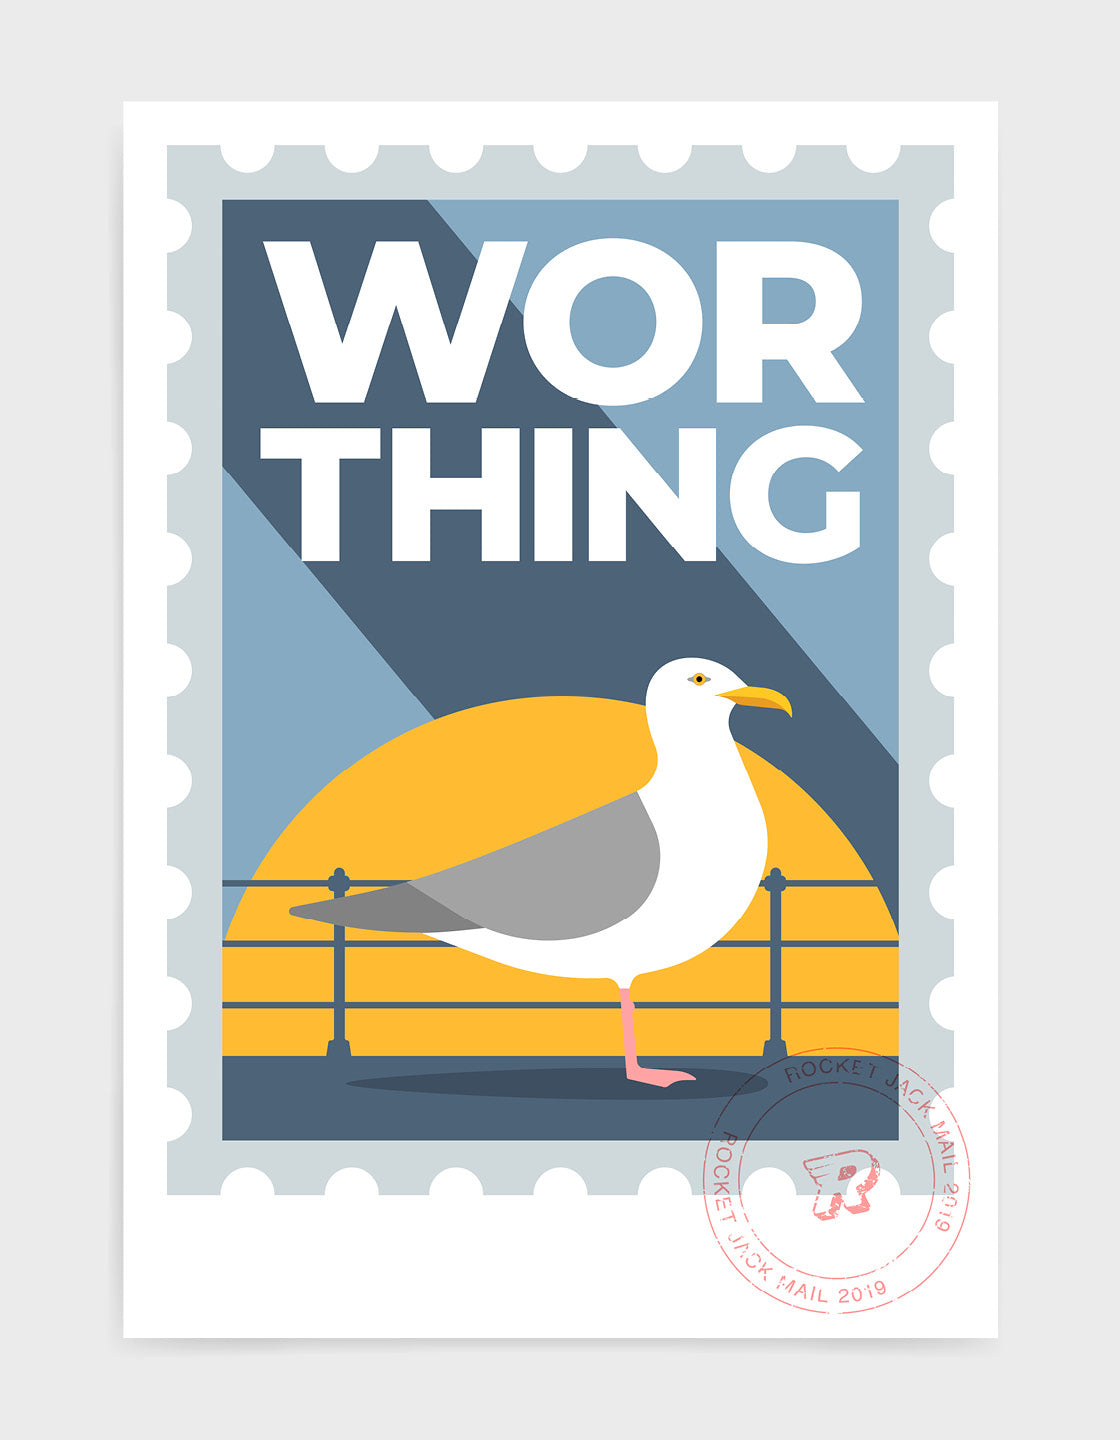 Worthing travel print in the style of a stamp. Features a seagull and promenade railing with bold Worthing text on a grey and yellow background